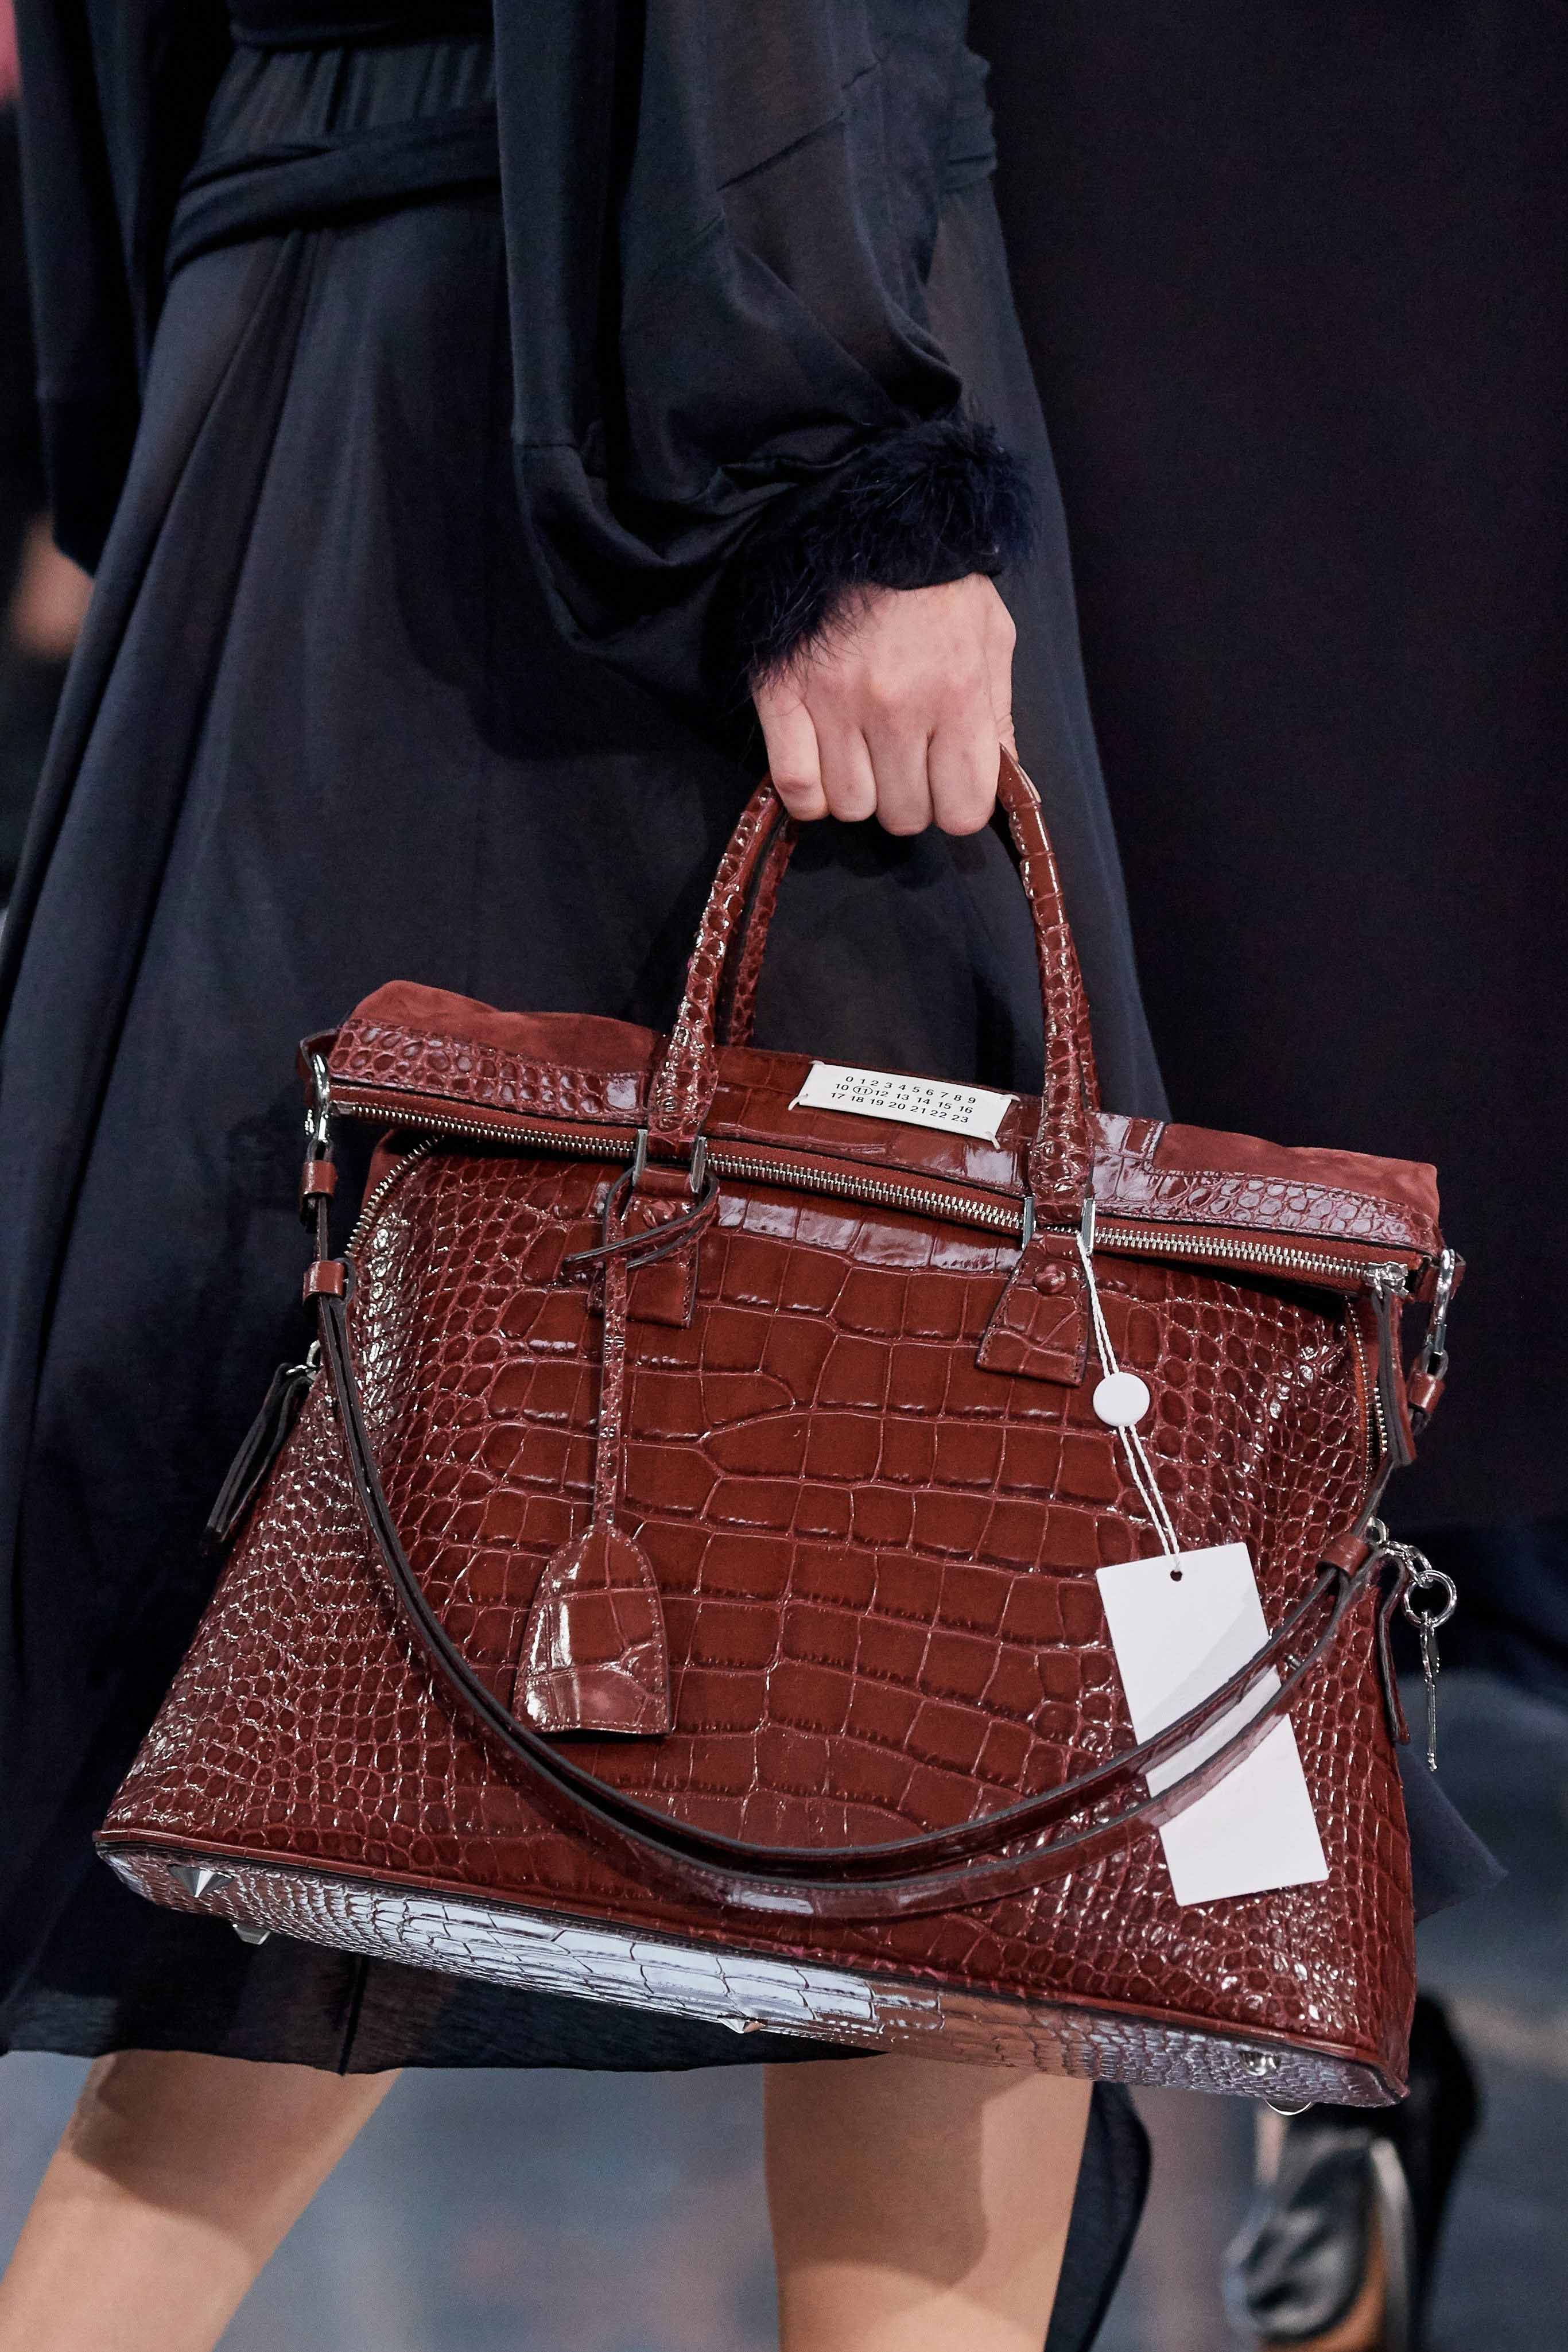 Maison Margiela Spring Summer 2020 SS2020 trends runway coverage Ready To Wear Vogue details bag